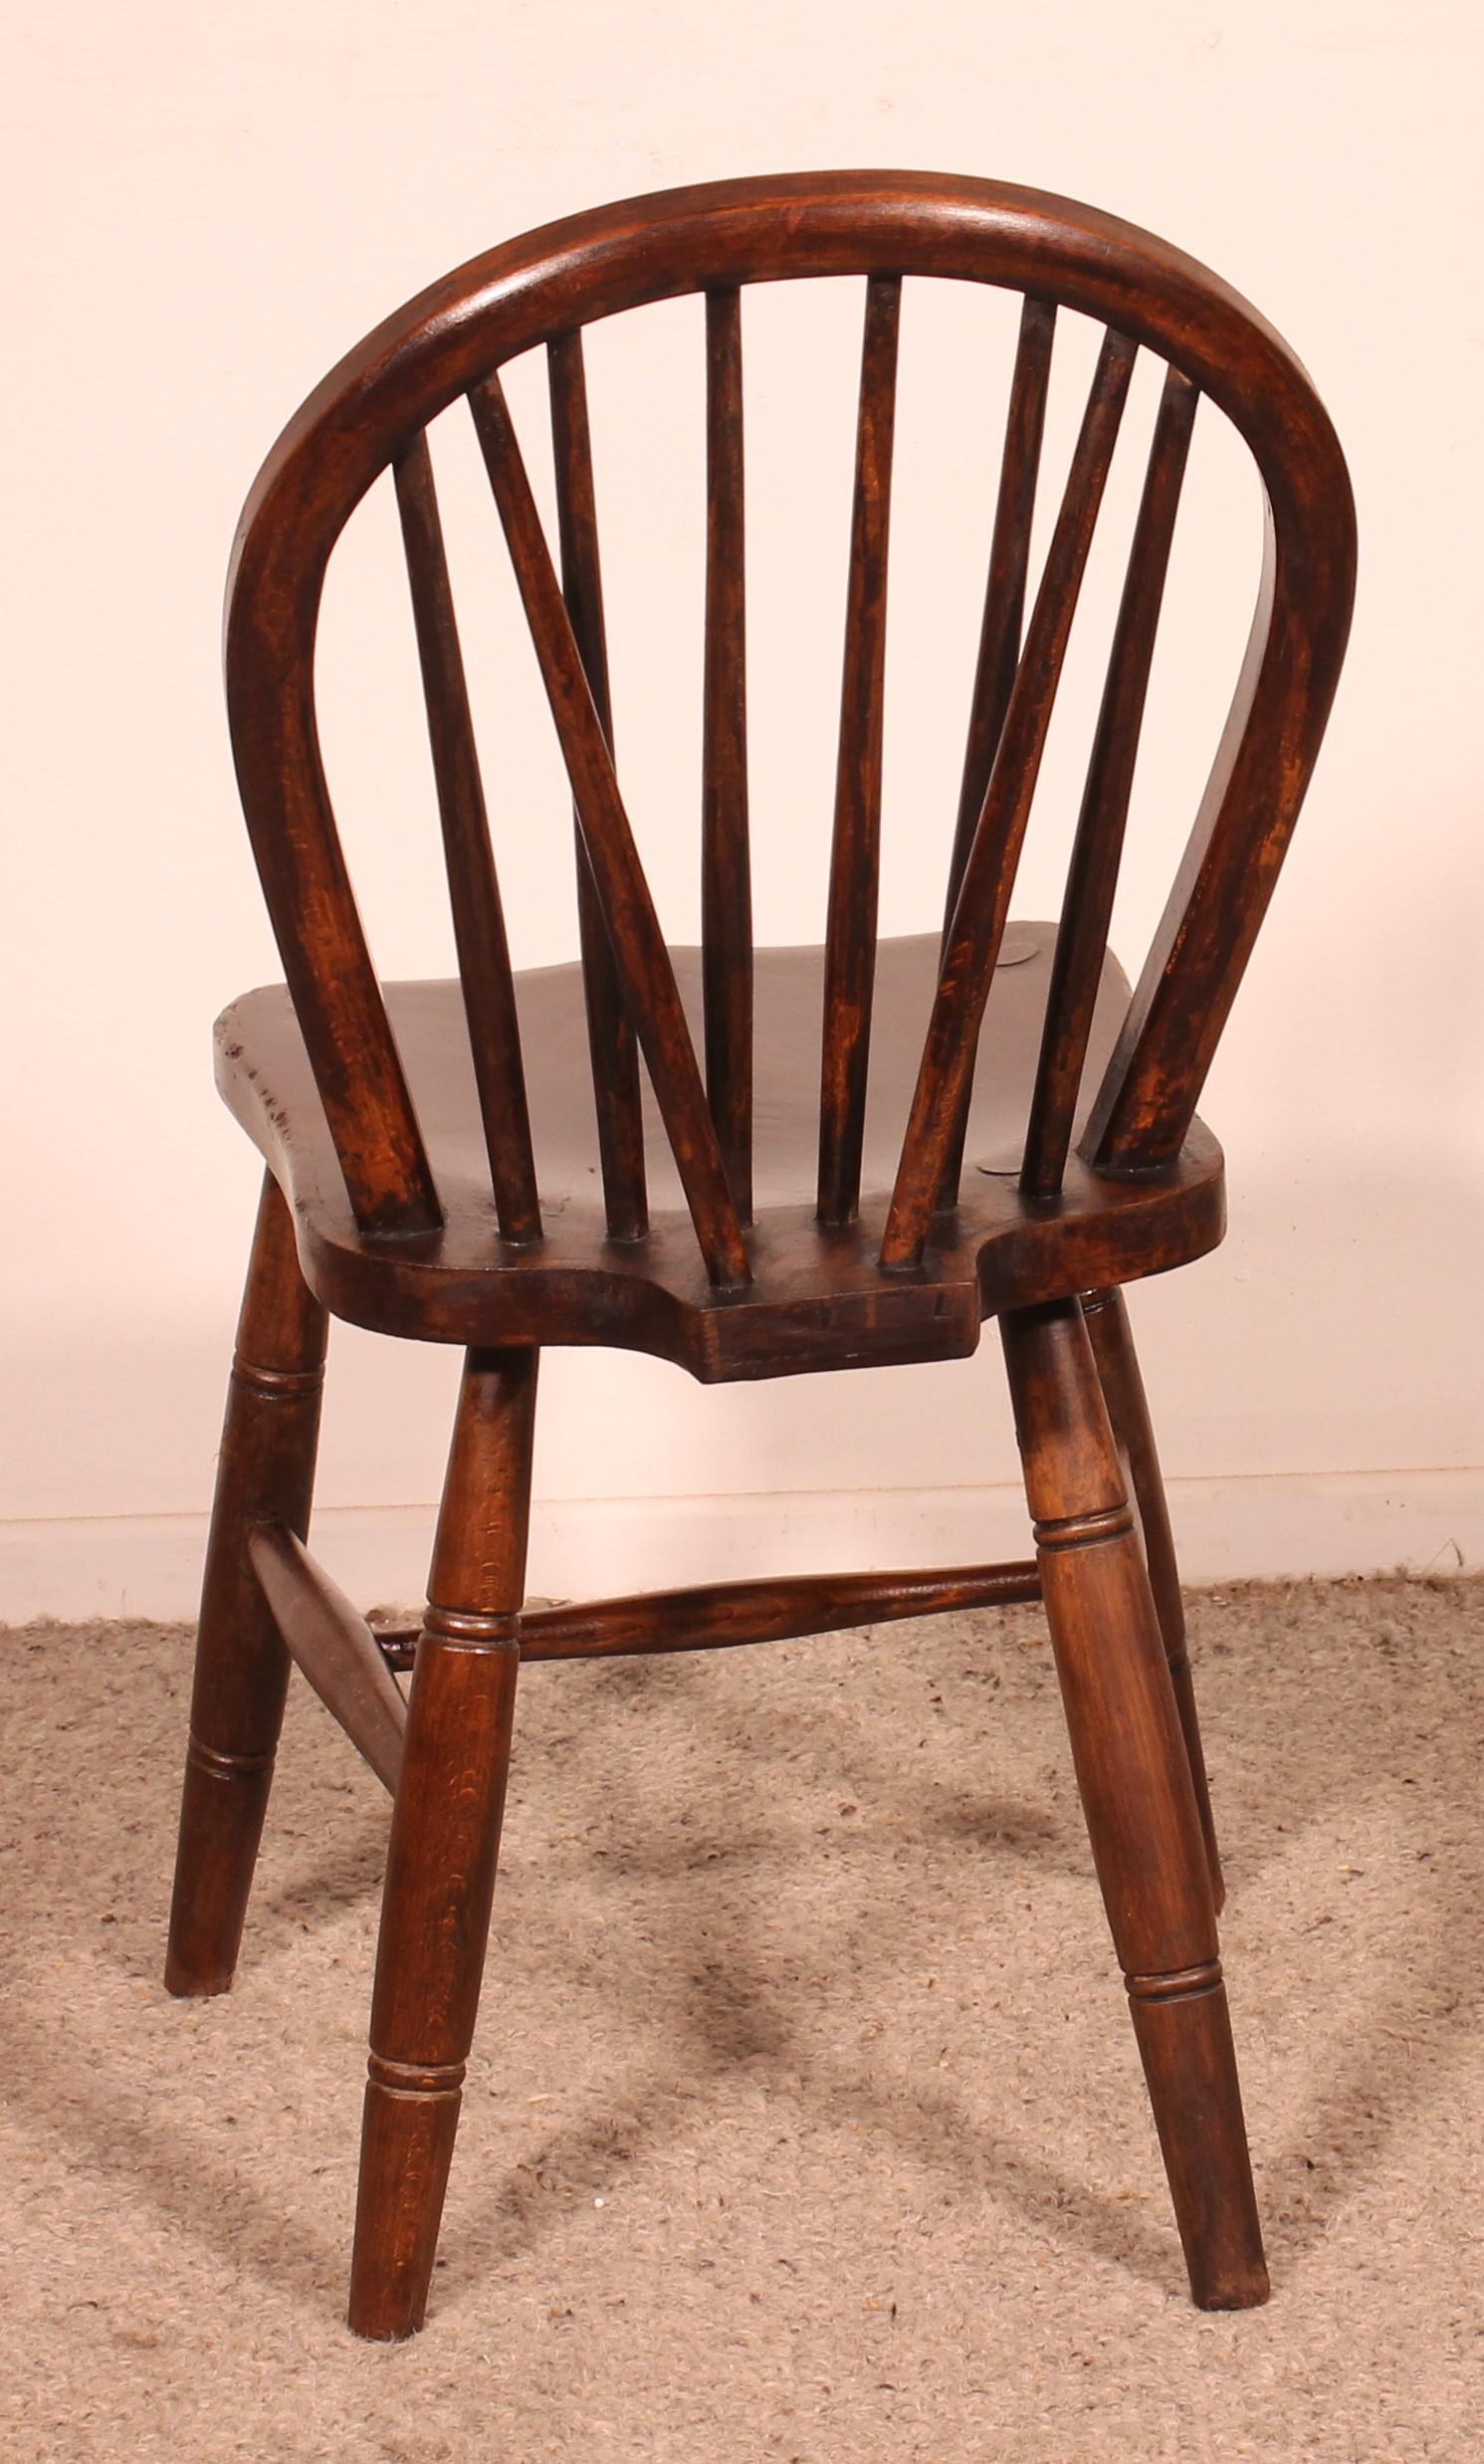 Elegant set of 4 English Windsor chairs from the 19th century in chestnut
good quality set which has an elegant base and a back composed of small bars which gives them an original look
Very beautiful patina and in superb condition
The chairs are